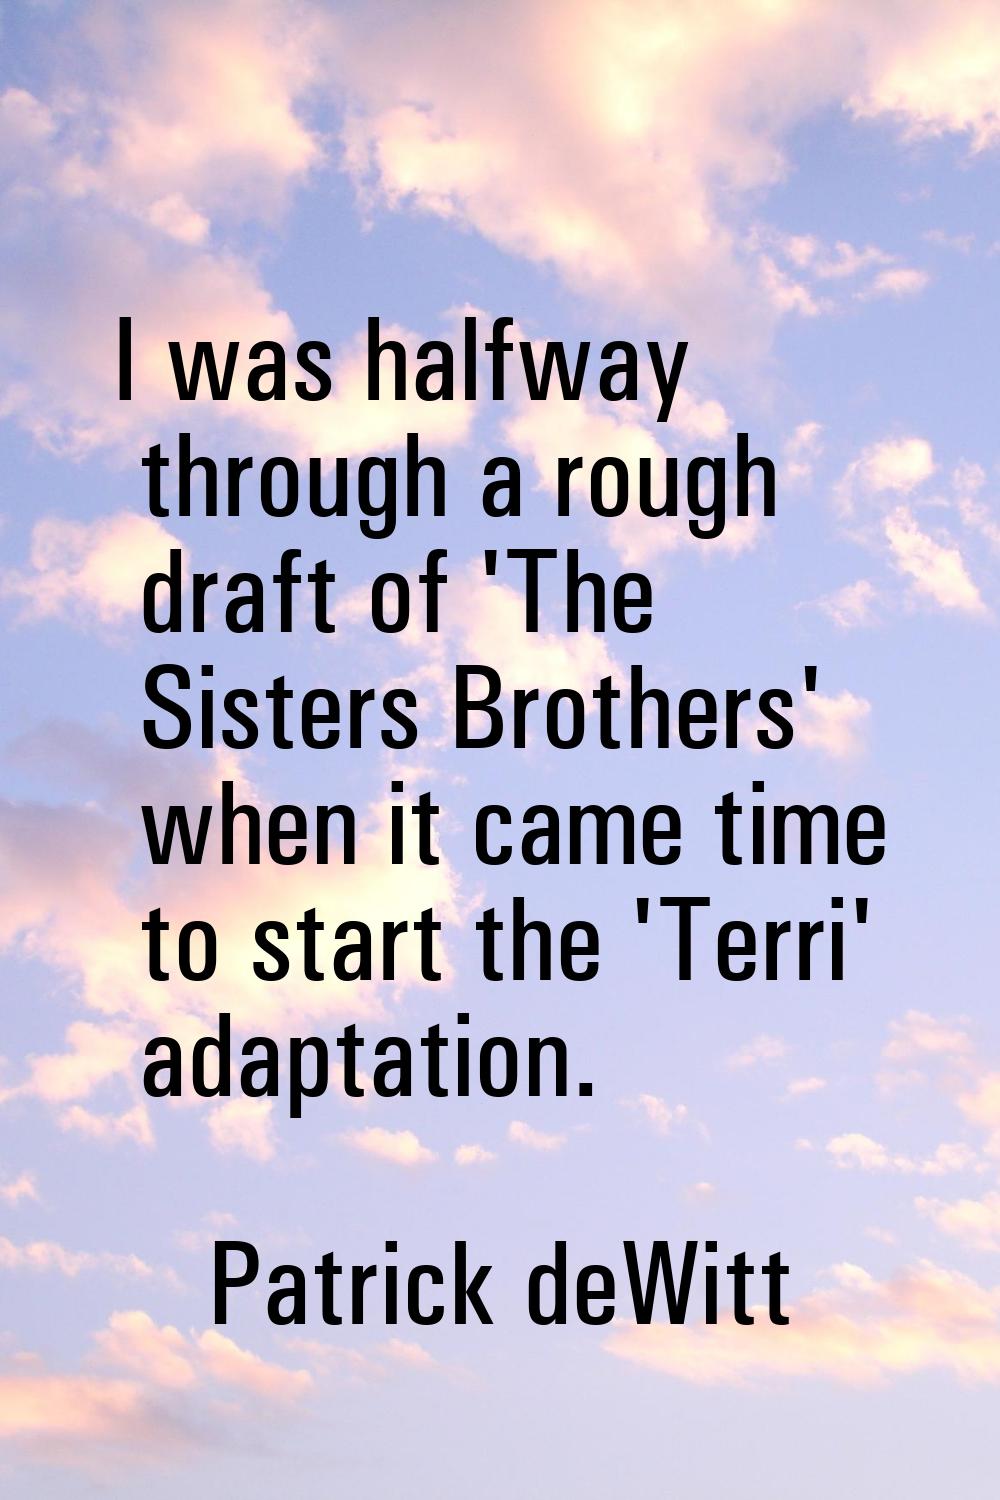 I was halfway through a rough draft of 'The Sisters Brothers' when it came time to start the 'Terri